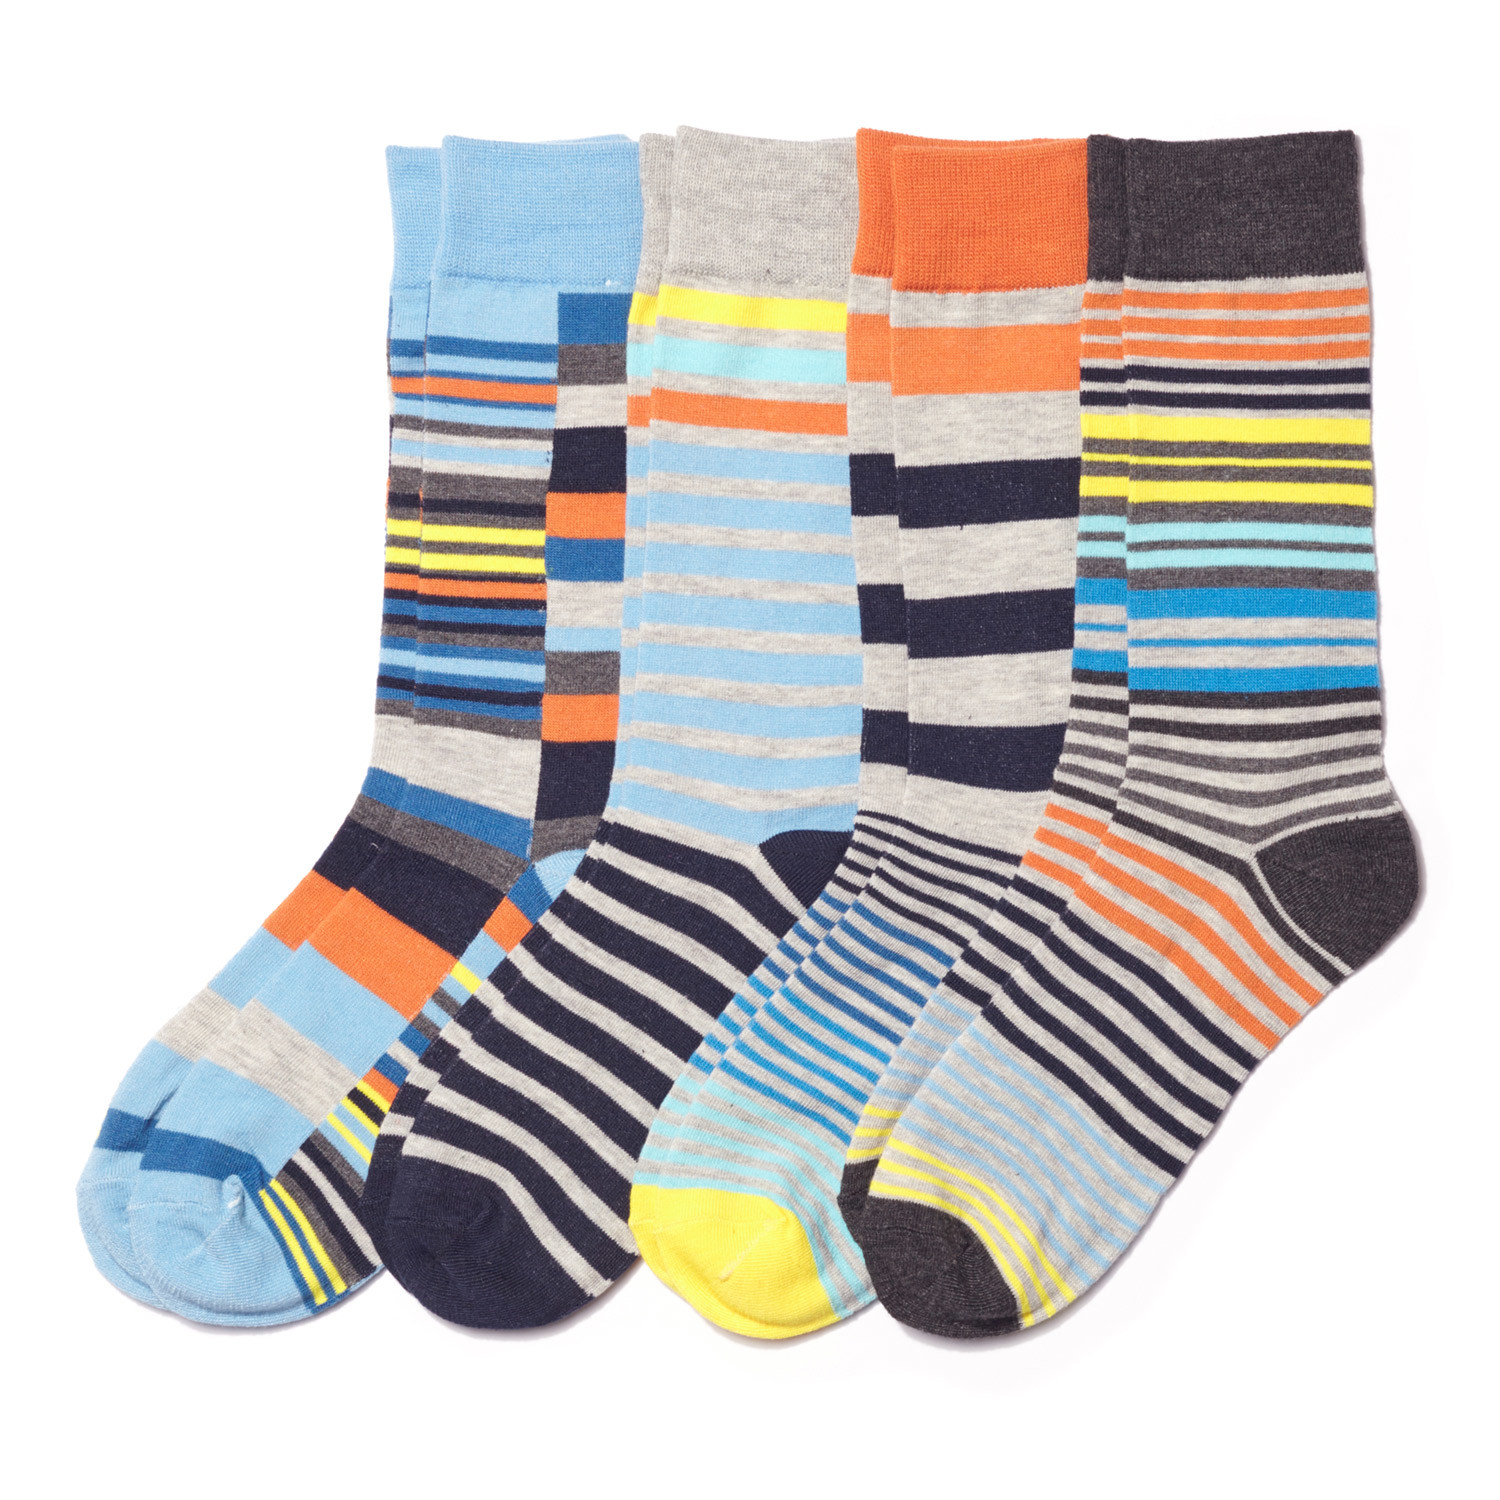 Colorblock Sock // Multi // Pack of 4 - Basic/Outfitters - Touch of Modern